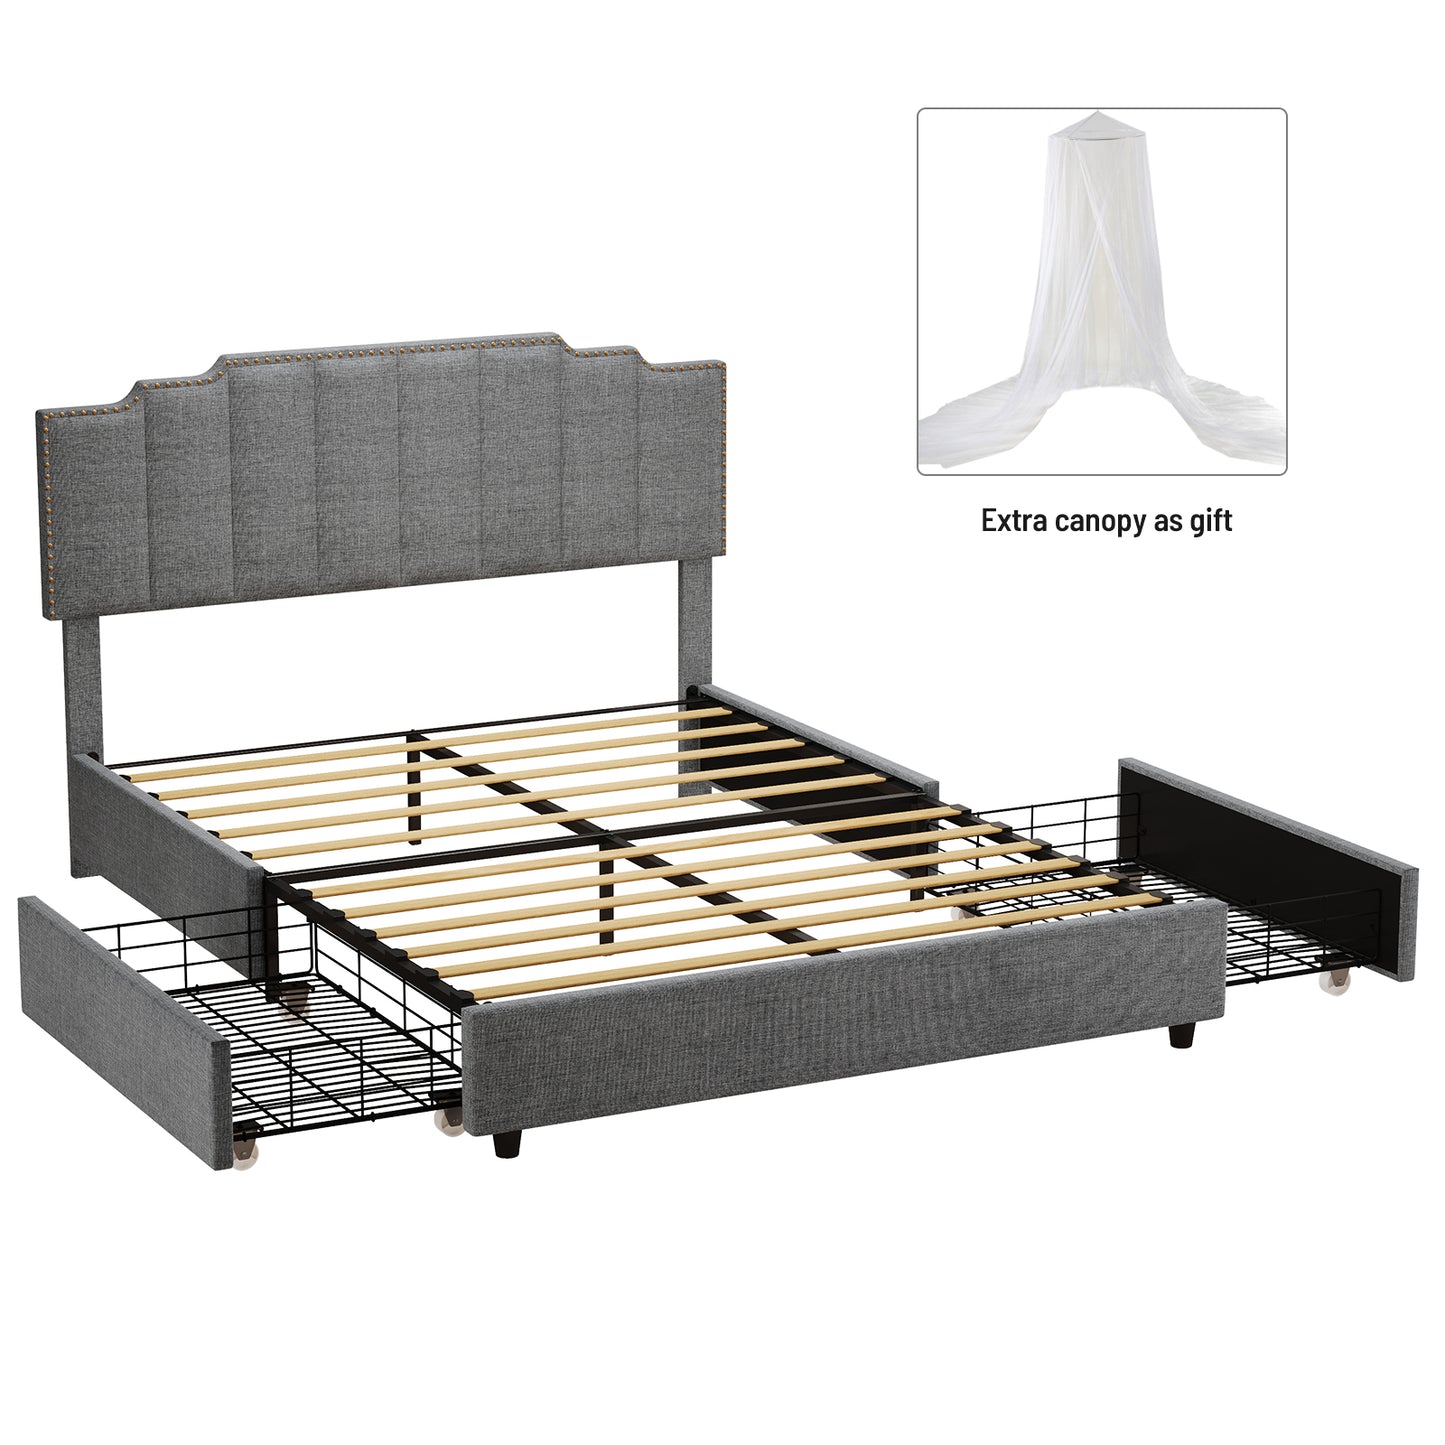 Queen Size Upholstered Platform Bed Linen Bed Frame with 2 Drawers Stitched Padded Headboard with Rivets Design Strong Bed Slats System No Box Spring Needed Grey